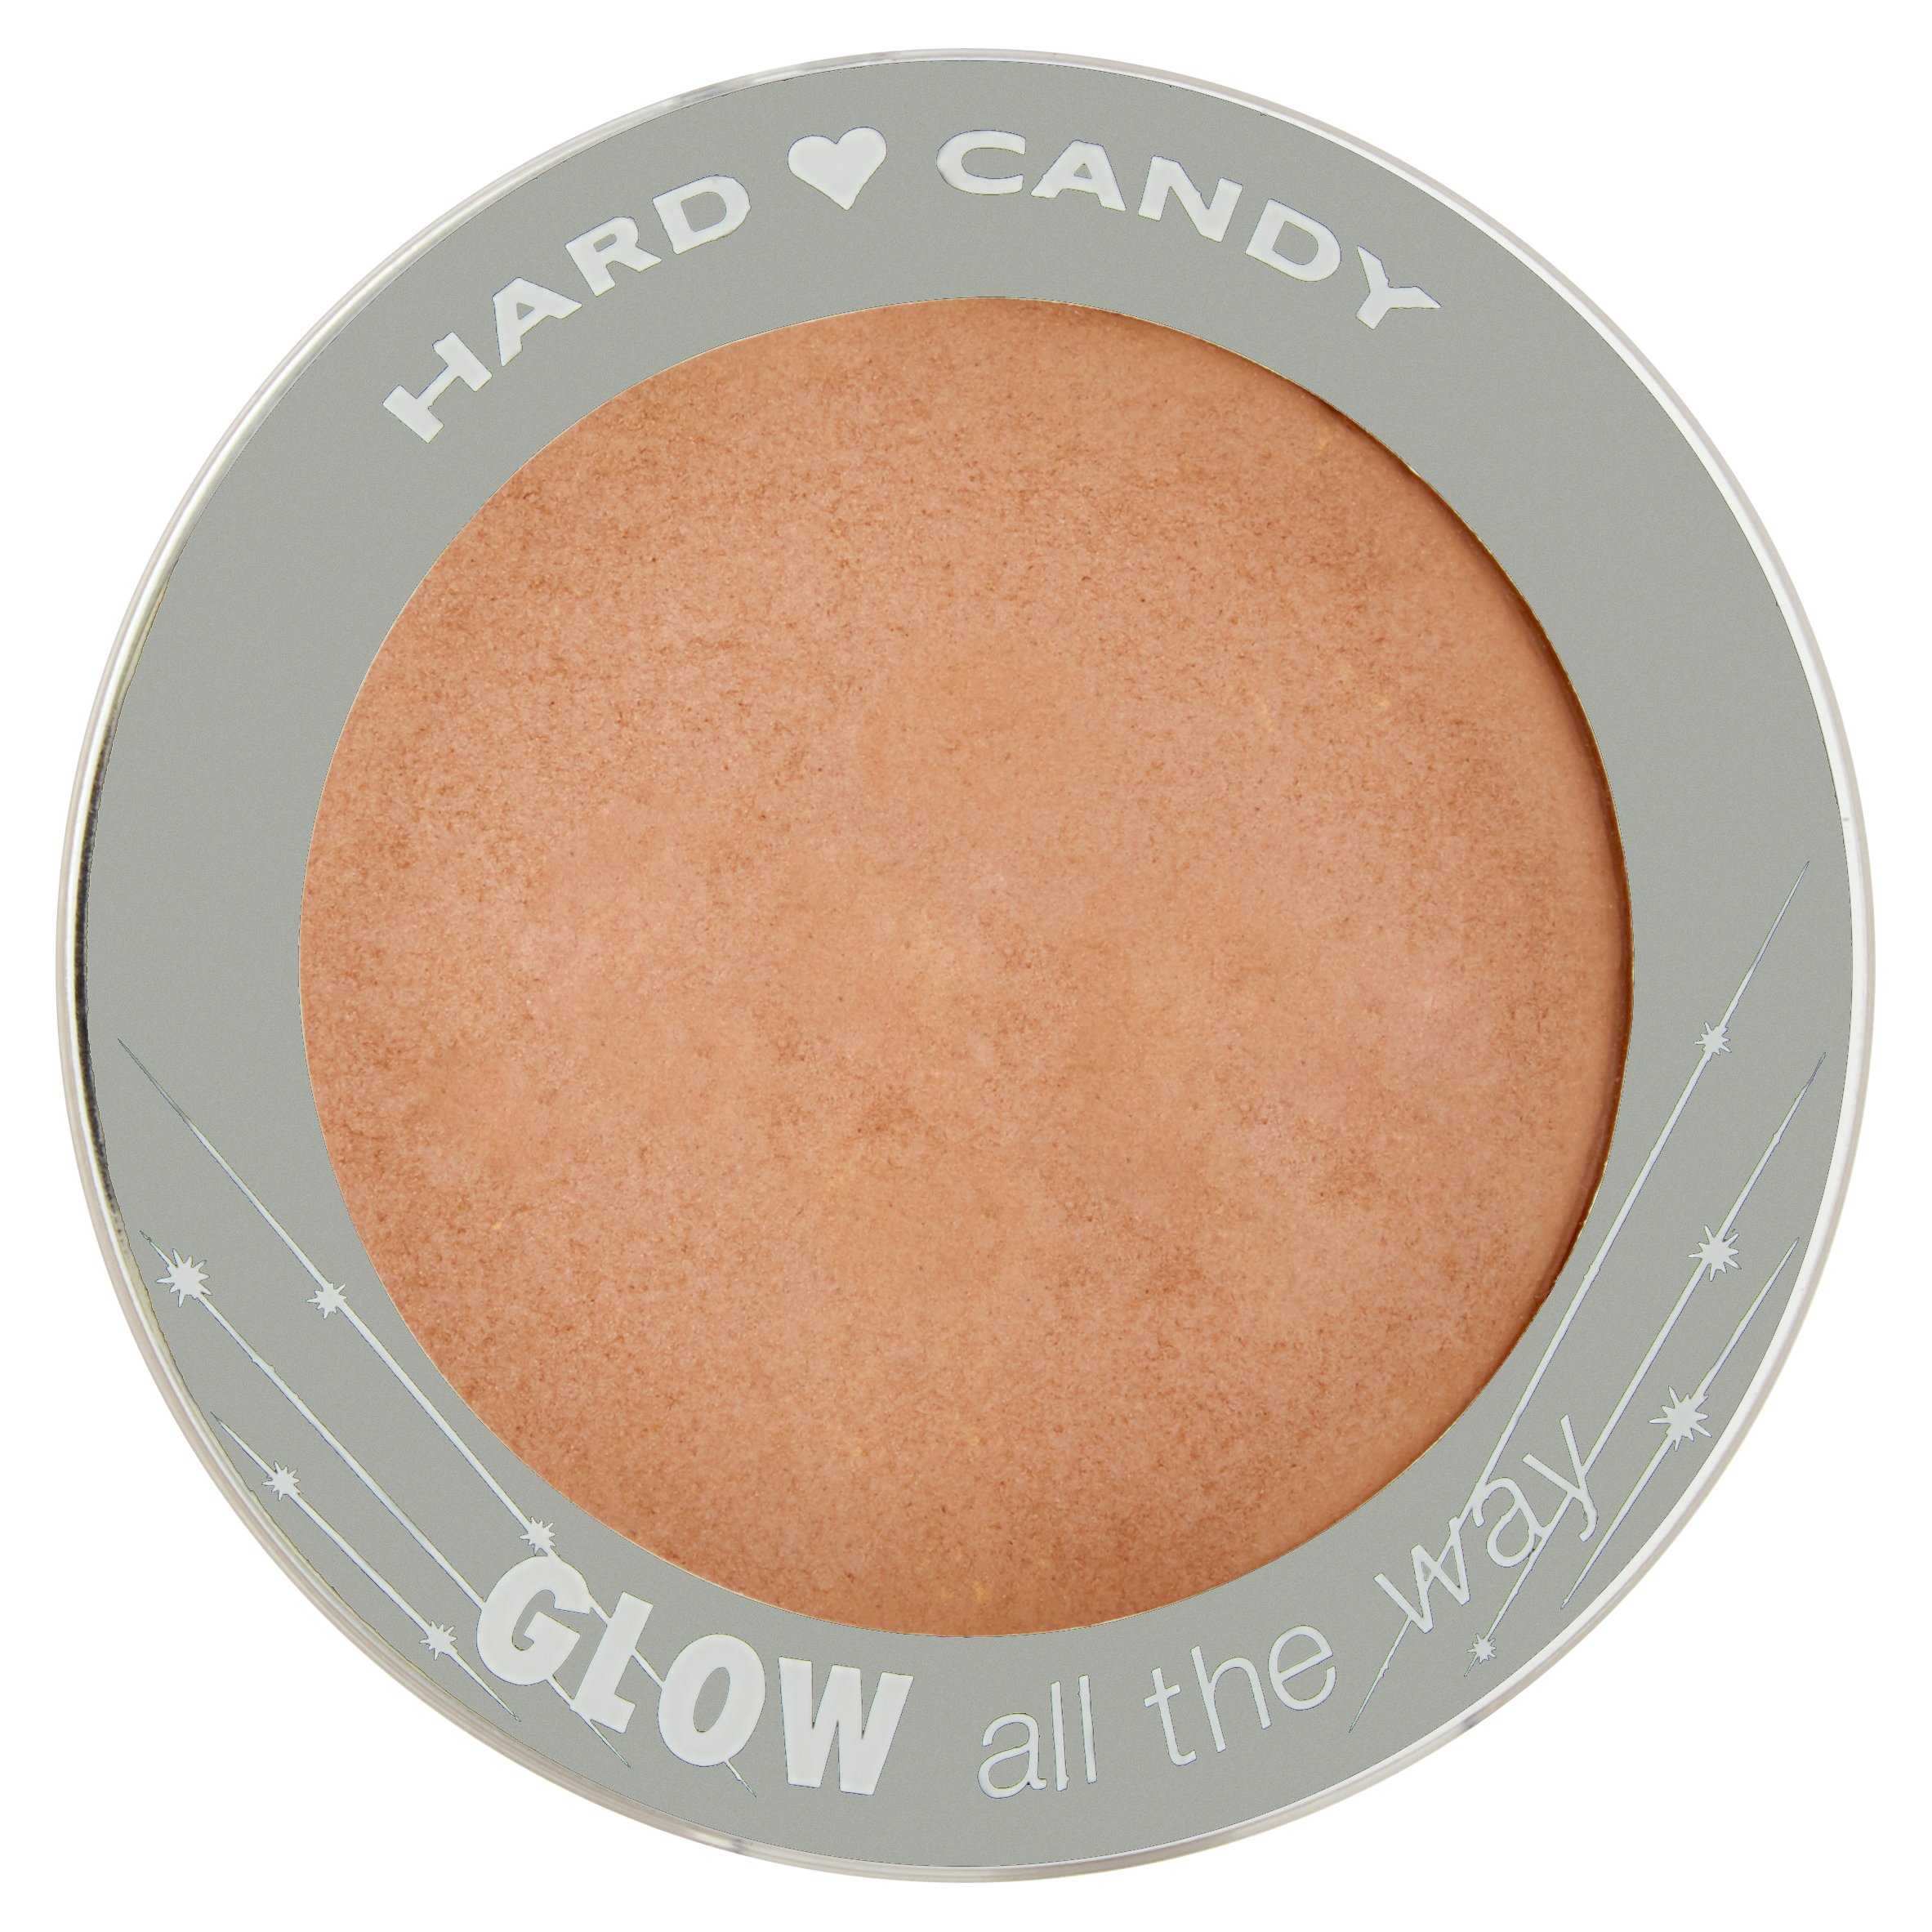 Hard Candy Glow All the Way 129 Tiki Baked Bronzer, 0.46 oz - image 1 of 5